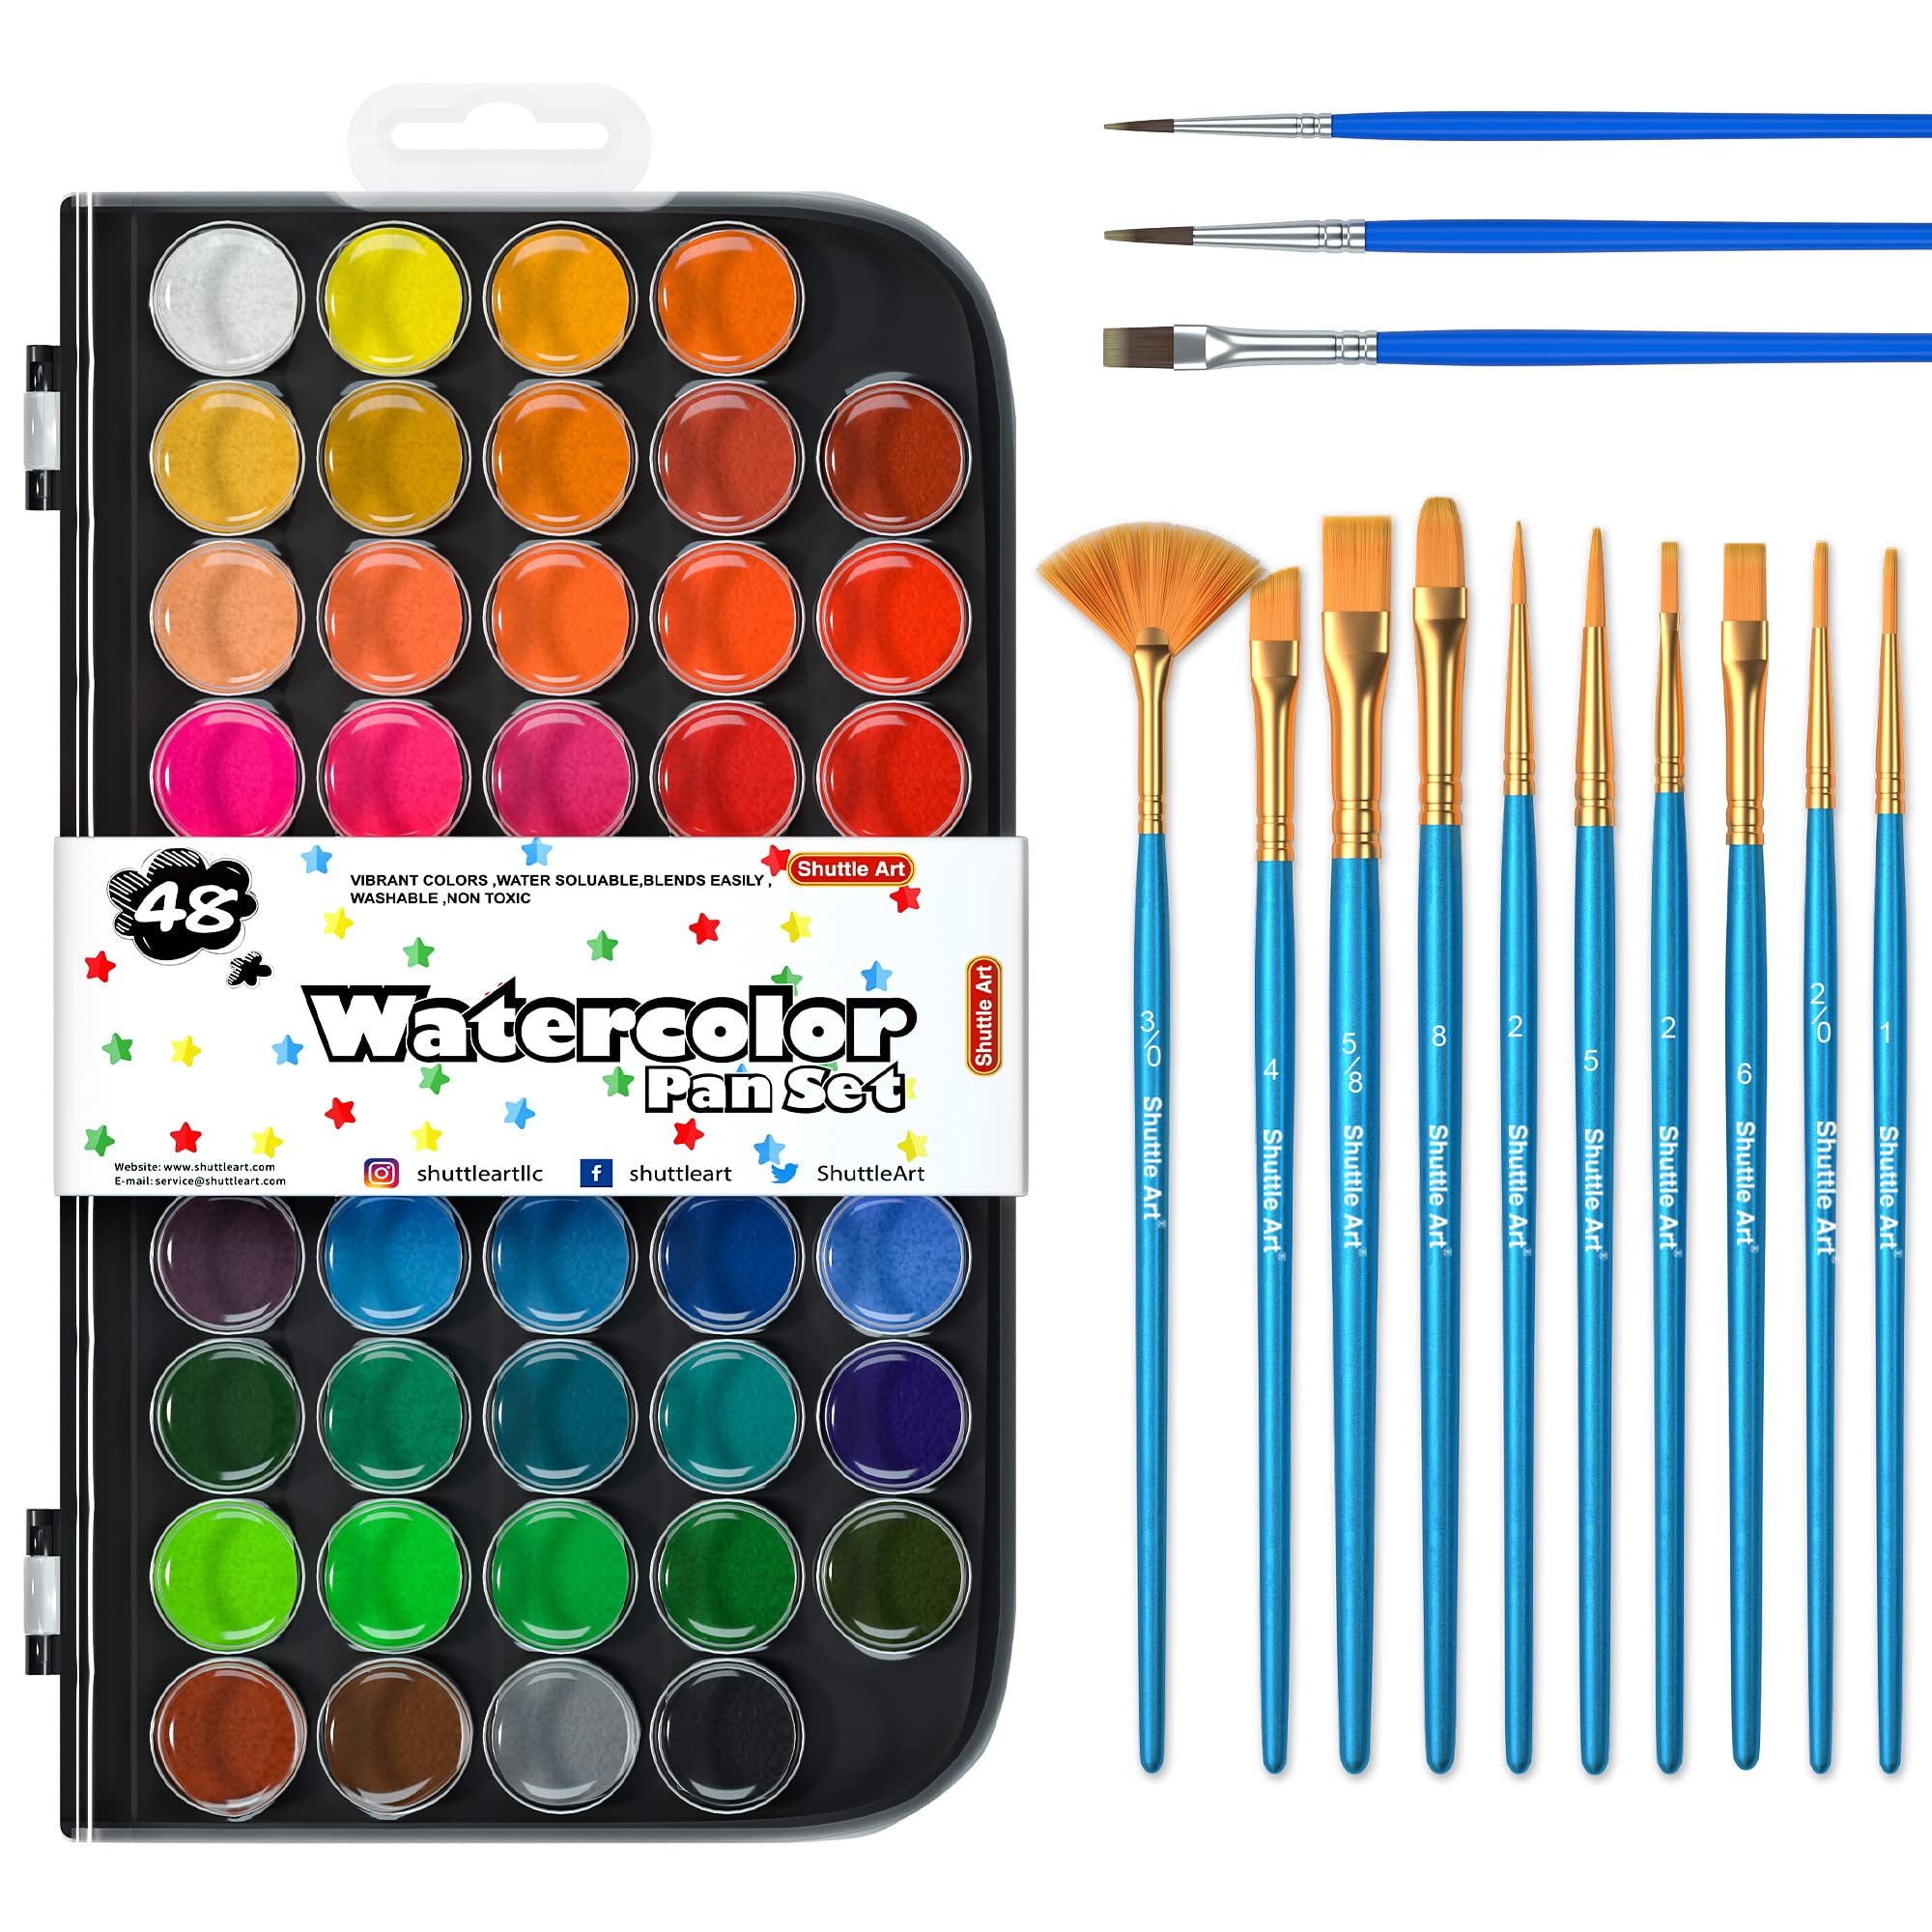 Shuttle Art 58 Pack Watercolor Paint Set, 48 Colors Watercolor Pan with 10 Paint Brushes for Beginners, Artists, Kids & Adults to Watercolor Paint, Bullet Journal, Calligraphy Practice